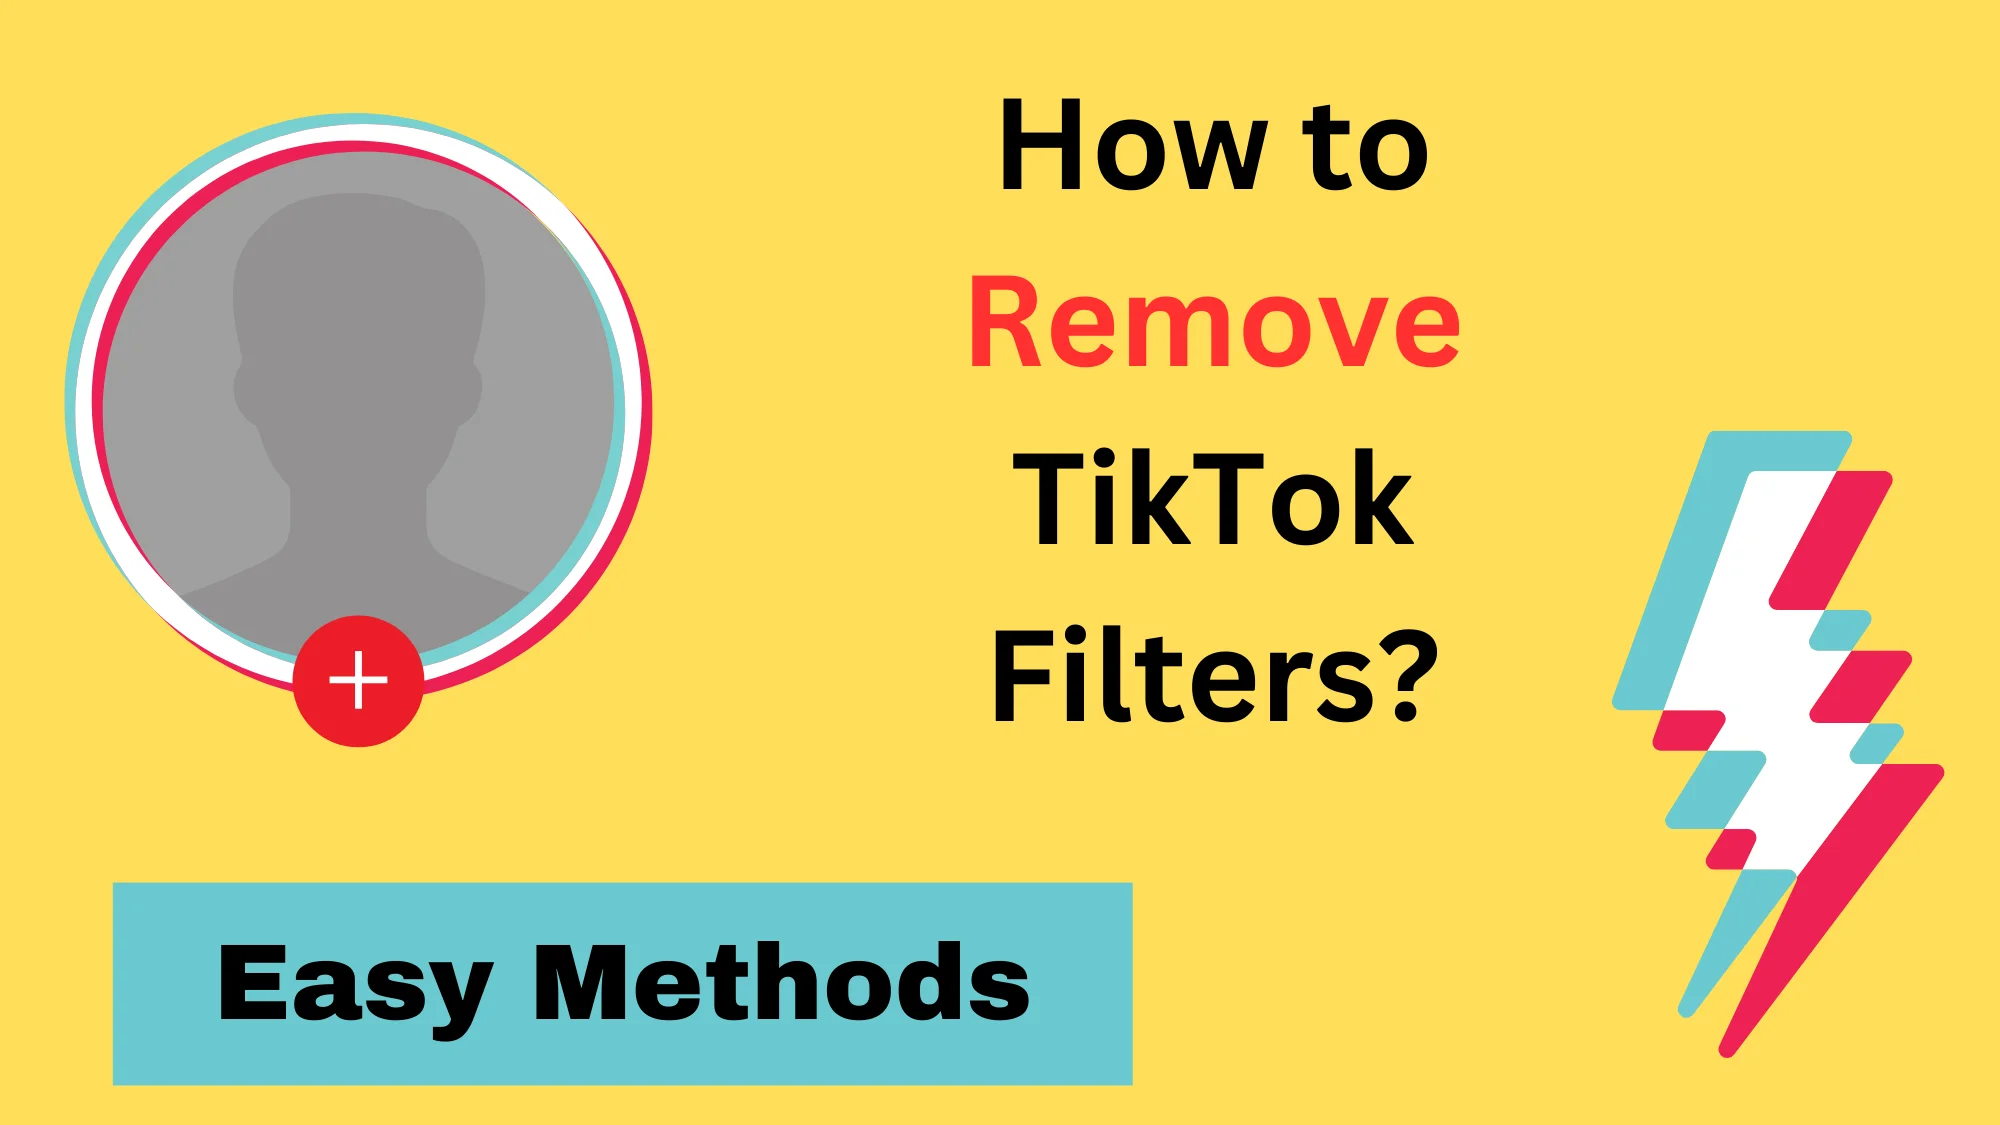 How to Remove TikTok Filters